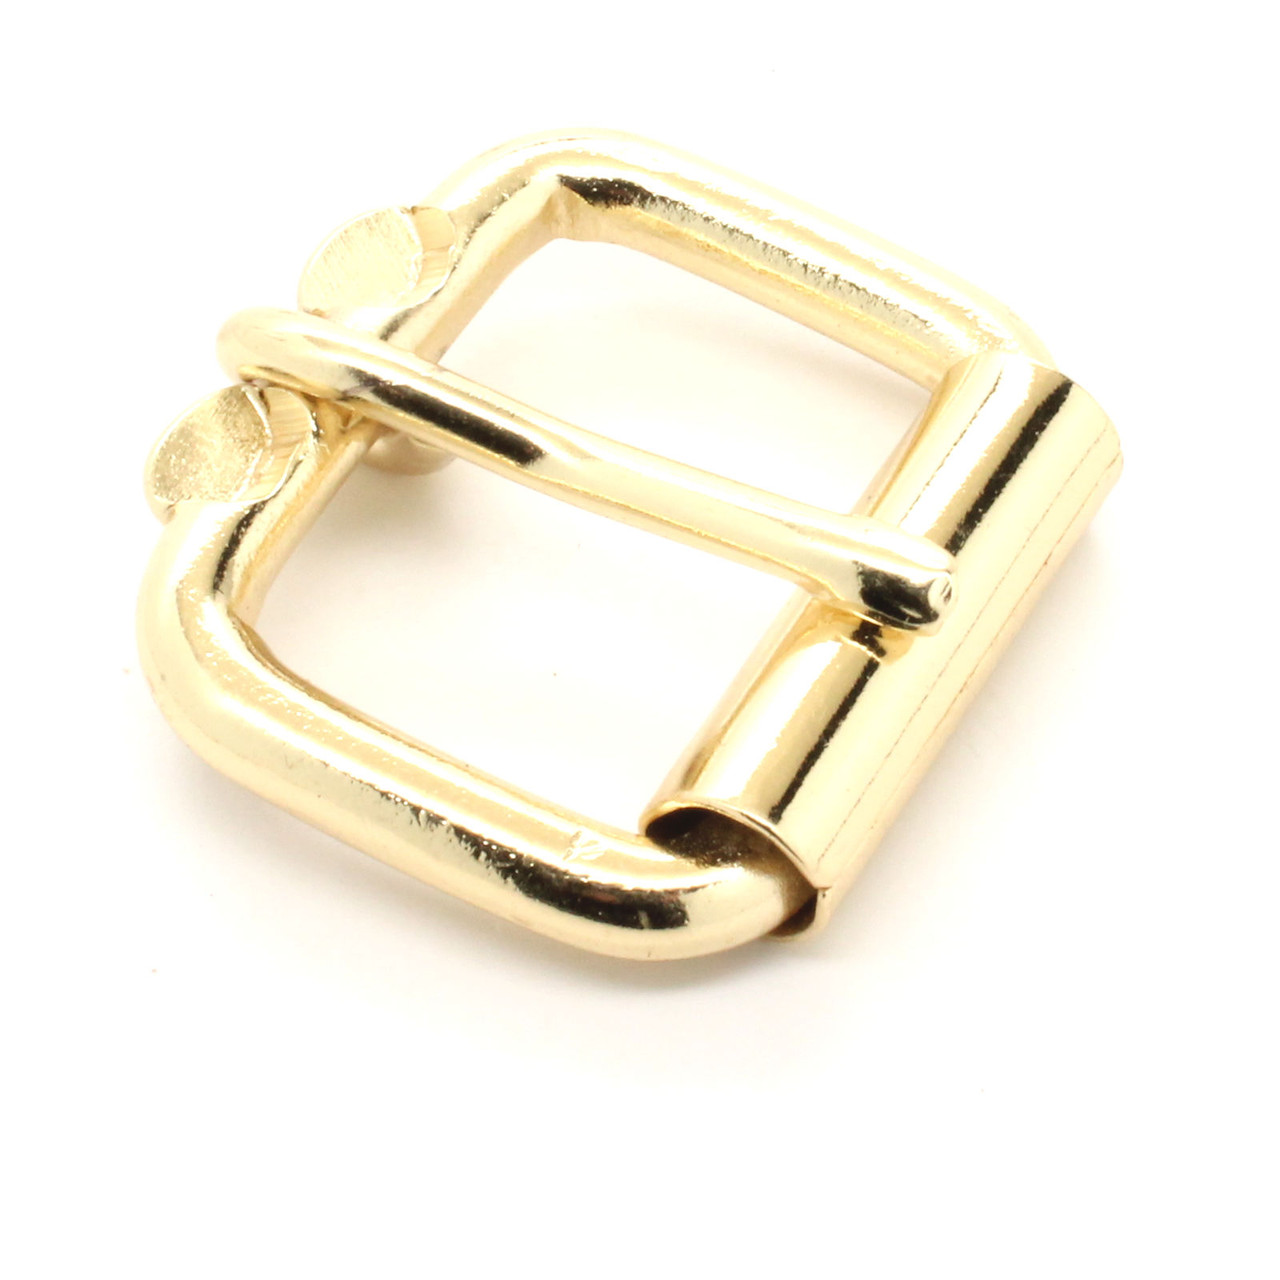 Side view of the 1-1/4" brass plate roller buckle